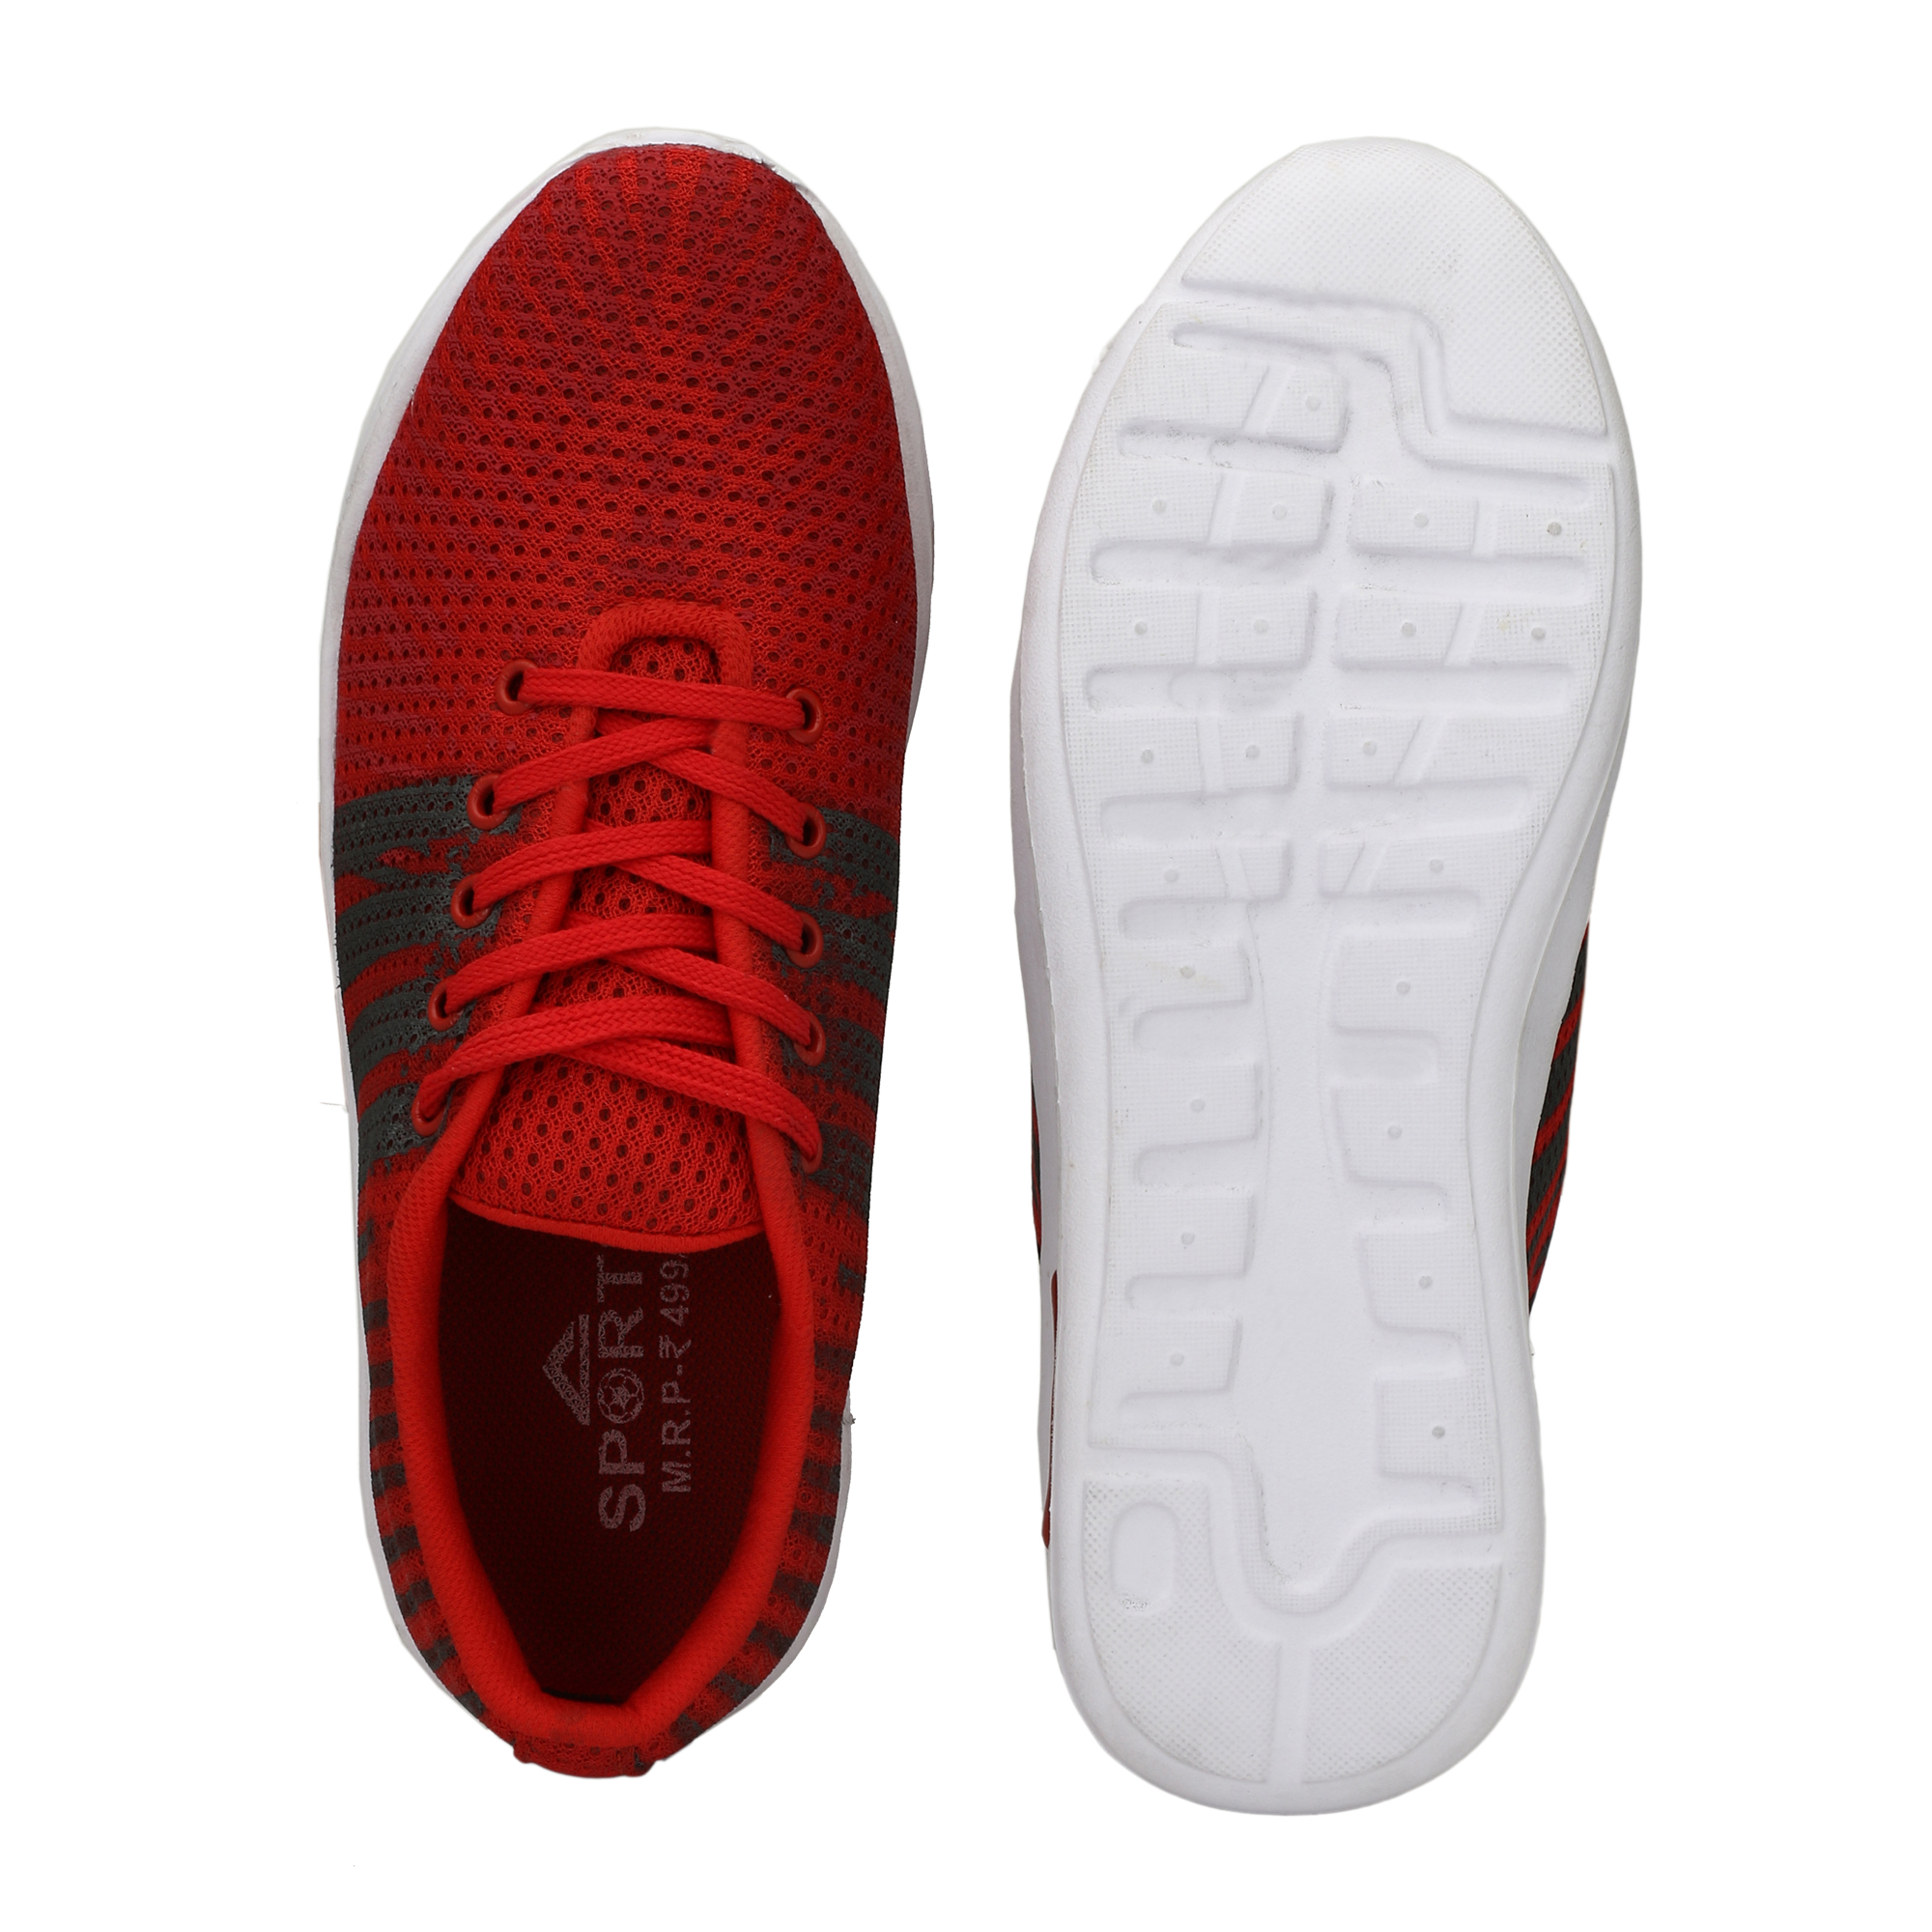 Buy sneakers carnival red addi shoe for mens Online @ ₹499 from ShopClues